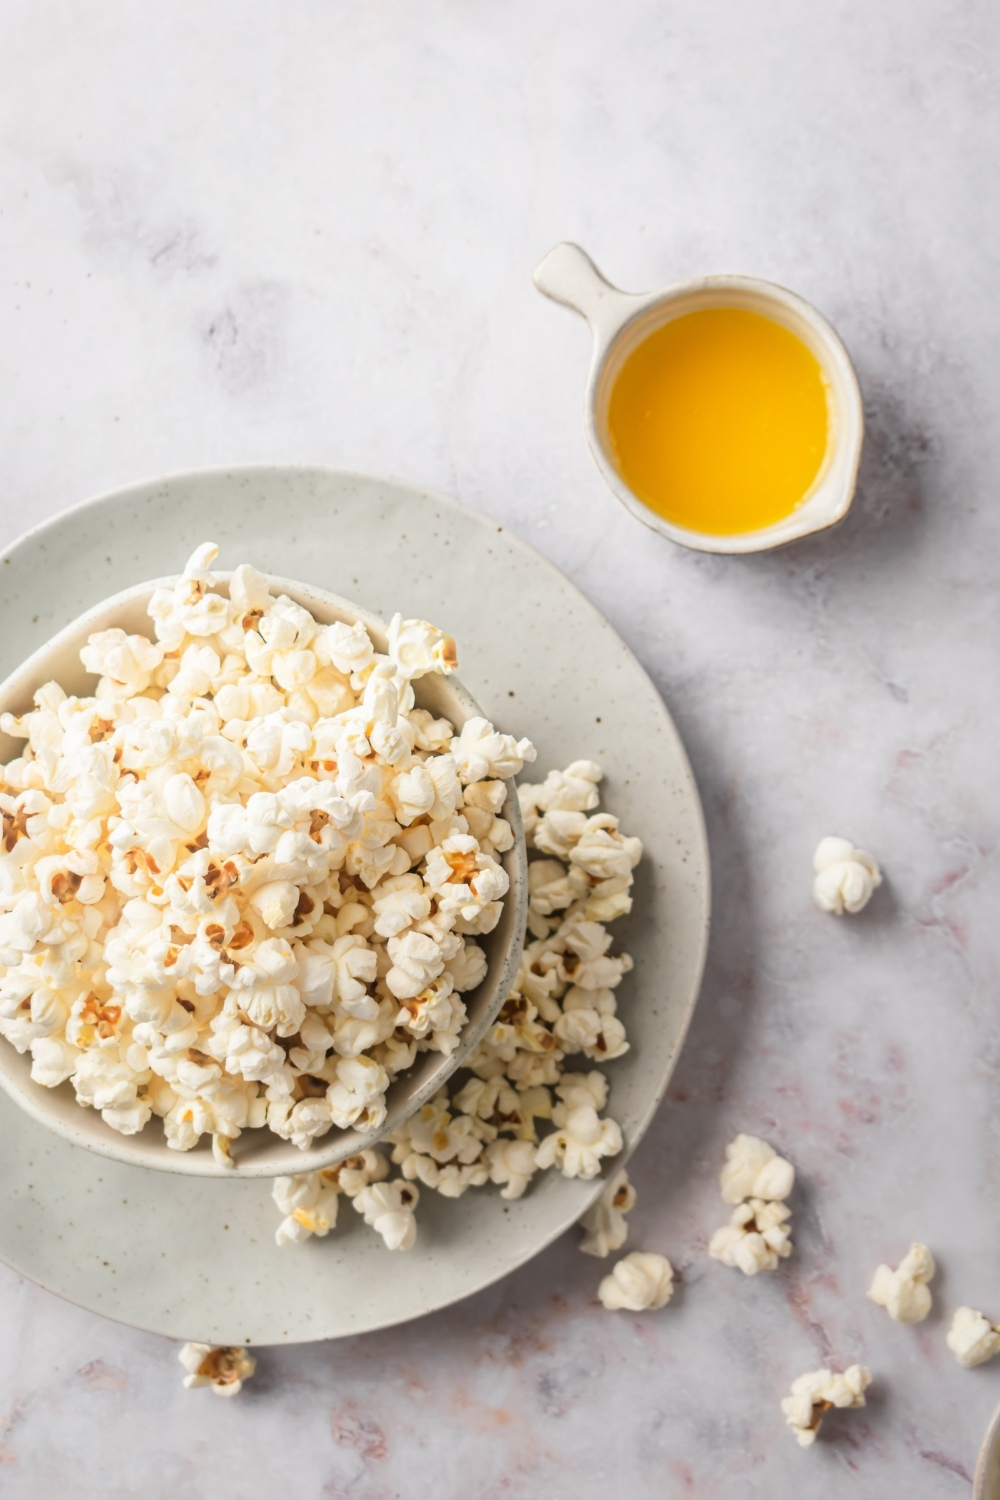 A white bowl filled with popcorn on a dish with a few pieces of popcorn on it on the white counter. Behind the dish is a small white bowl of melted butter.